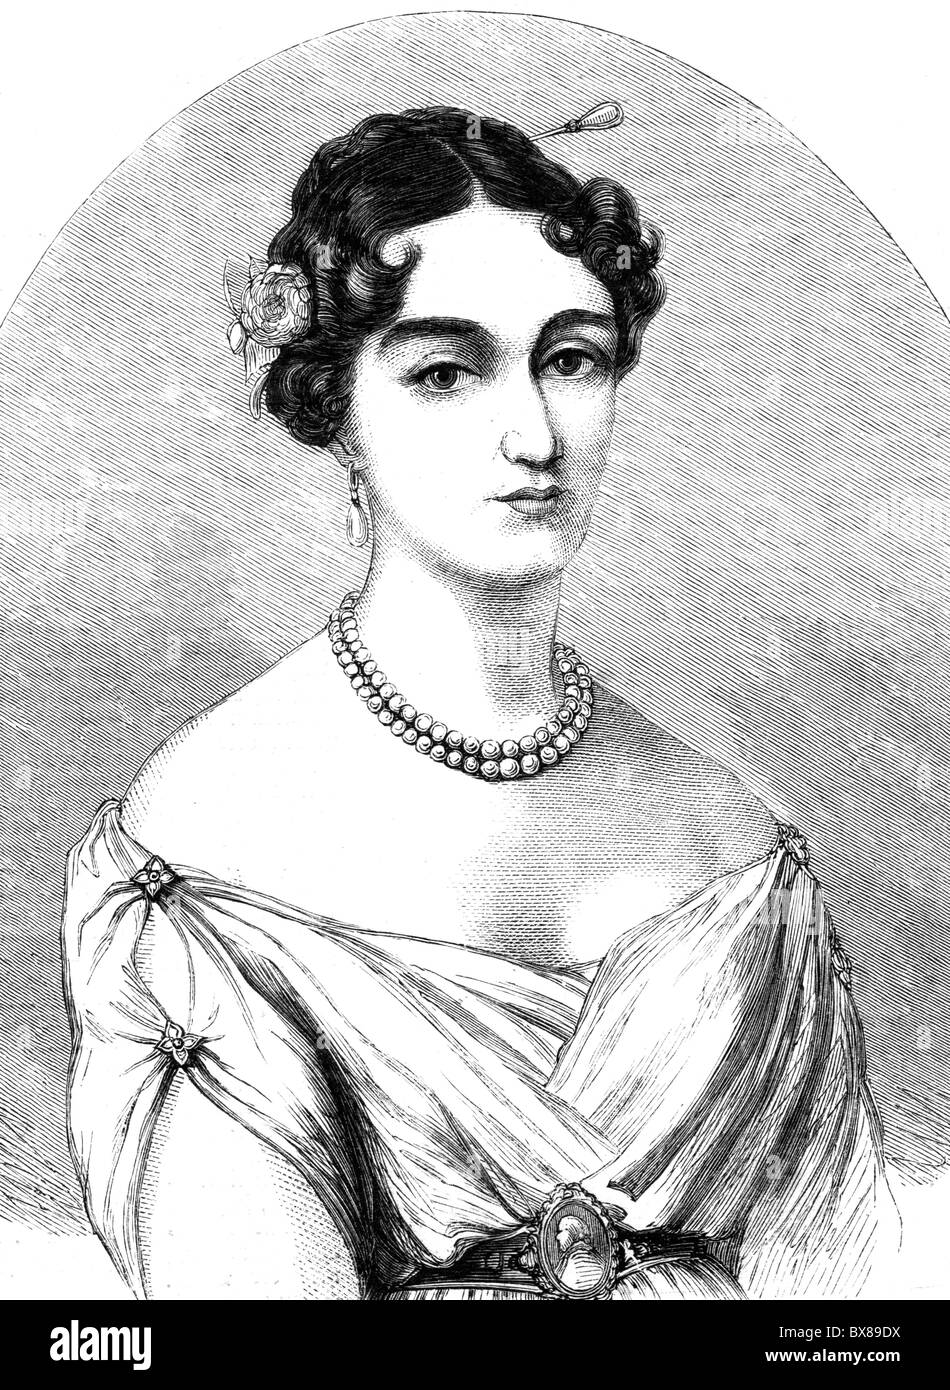 Patterson, Elizabeth 'Betsy', 6.2.1785 - 4.4.1879, first wife of Jerome Bonaparte, half length, wood engraving, 19th century, , Stock Photo